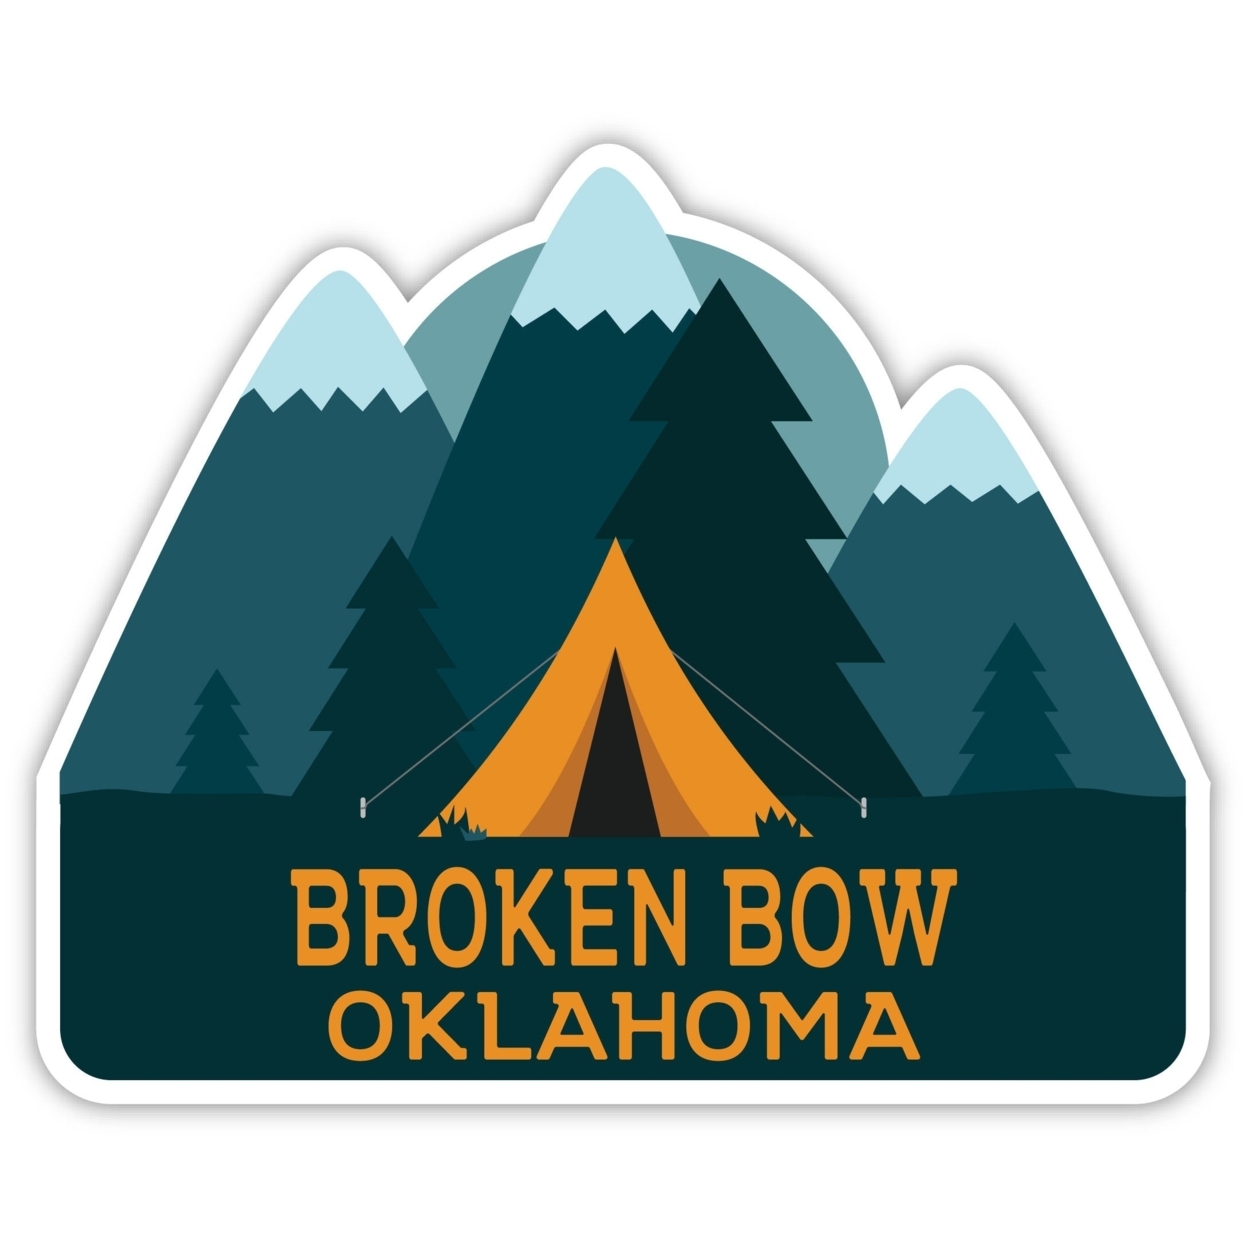 Broken Bow Oklahoma Souvenir Decorative Stickers (Choose Theme And Size) - 4-Pack, 4-Inch, Camp Life